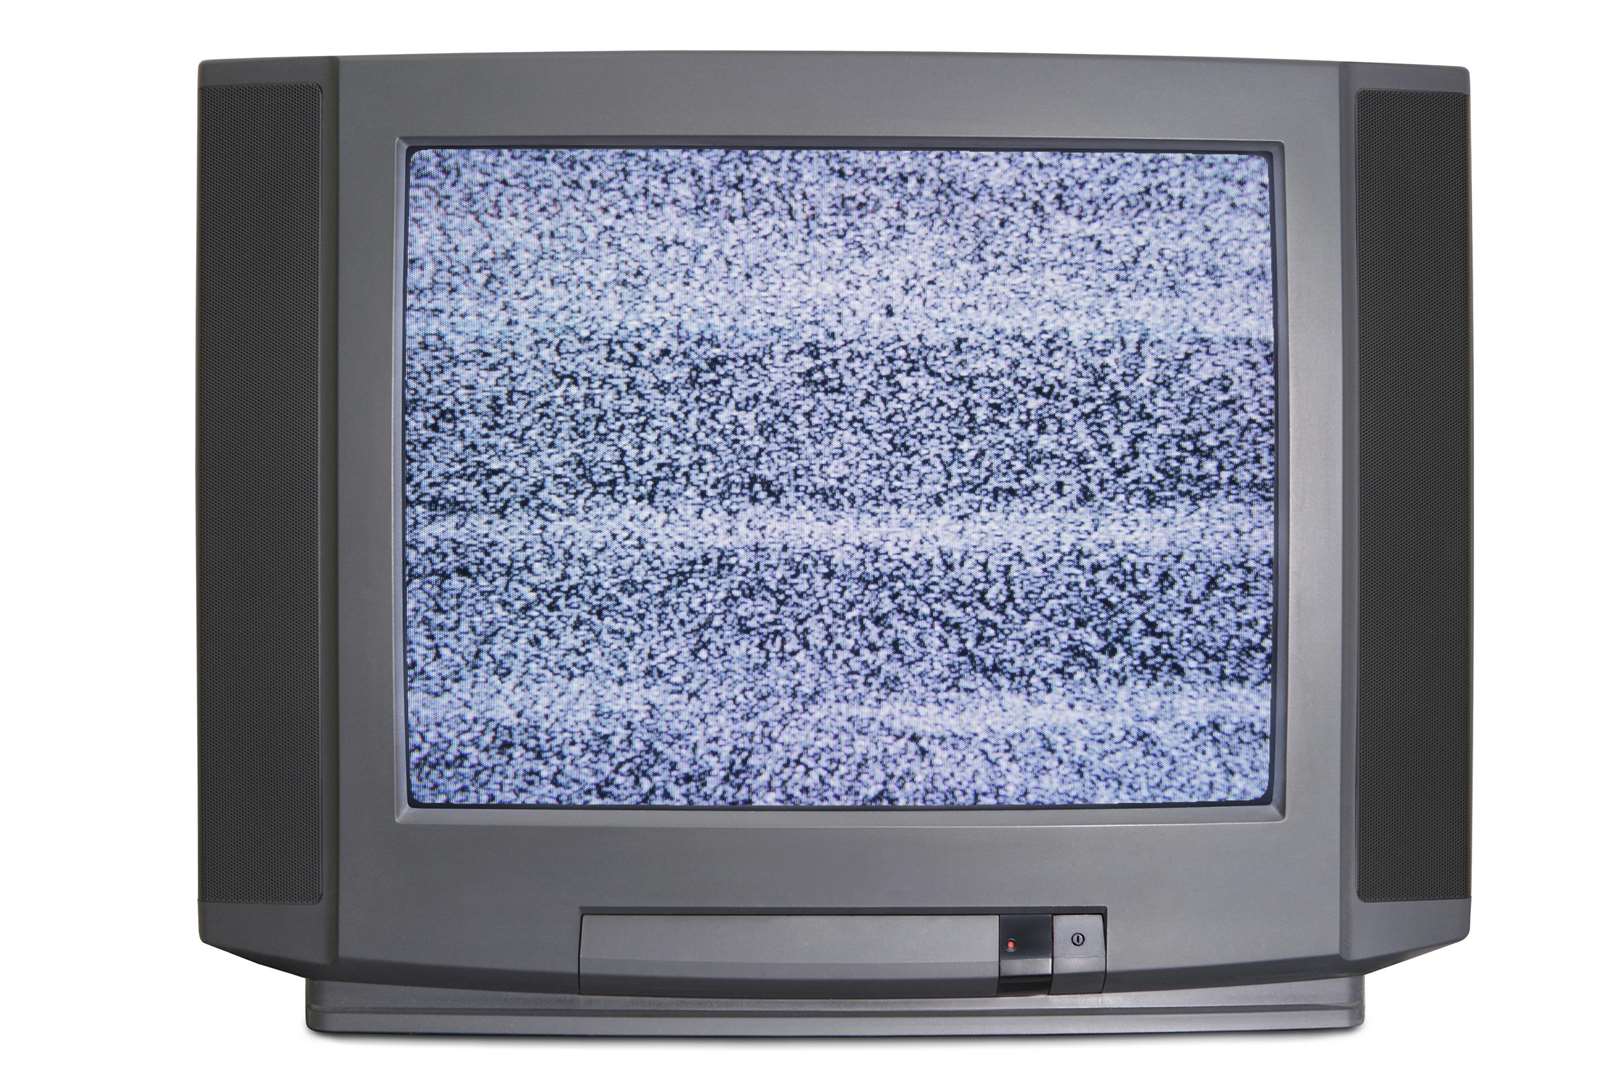 HDTV was broadcast for the first time during the 1990 World Cup in Italy. Picture: iStockphoto